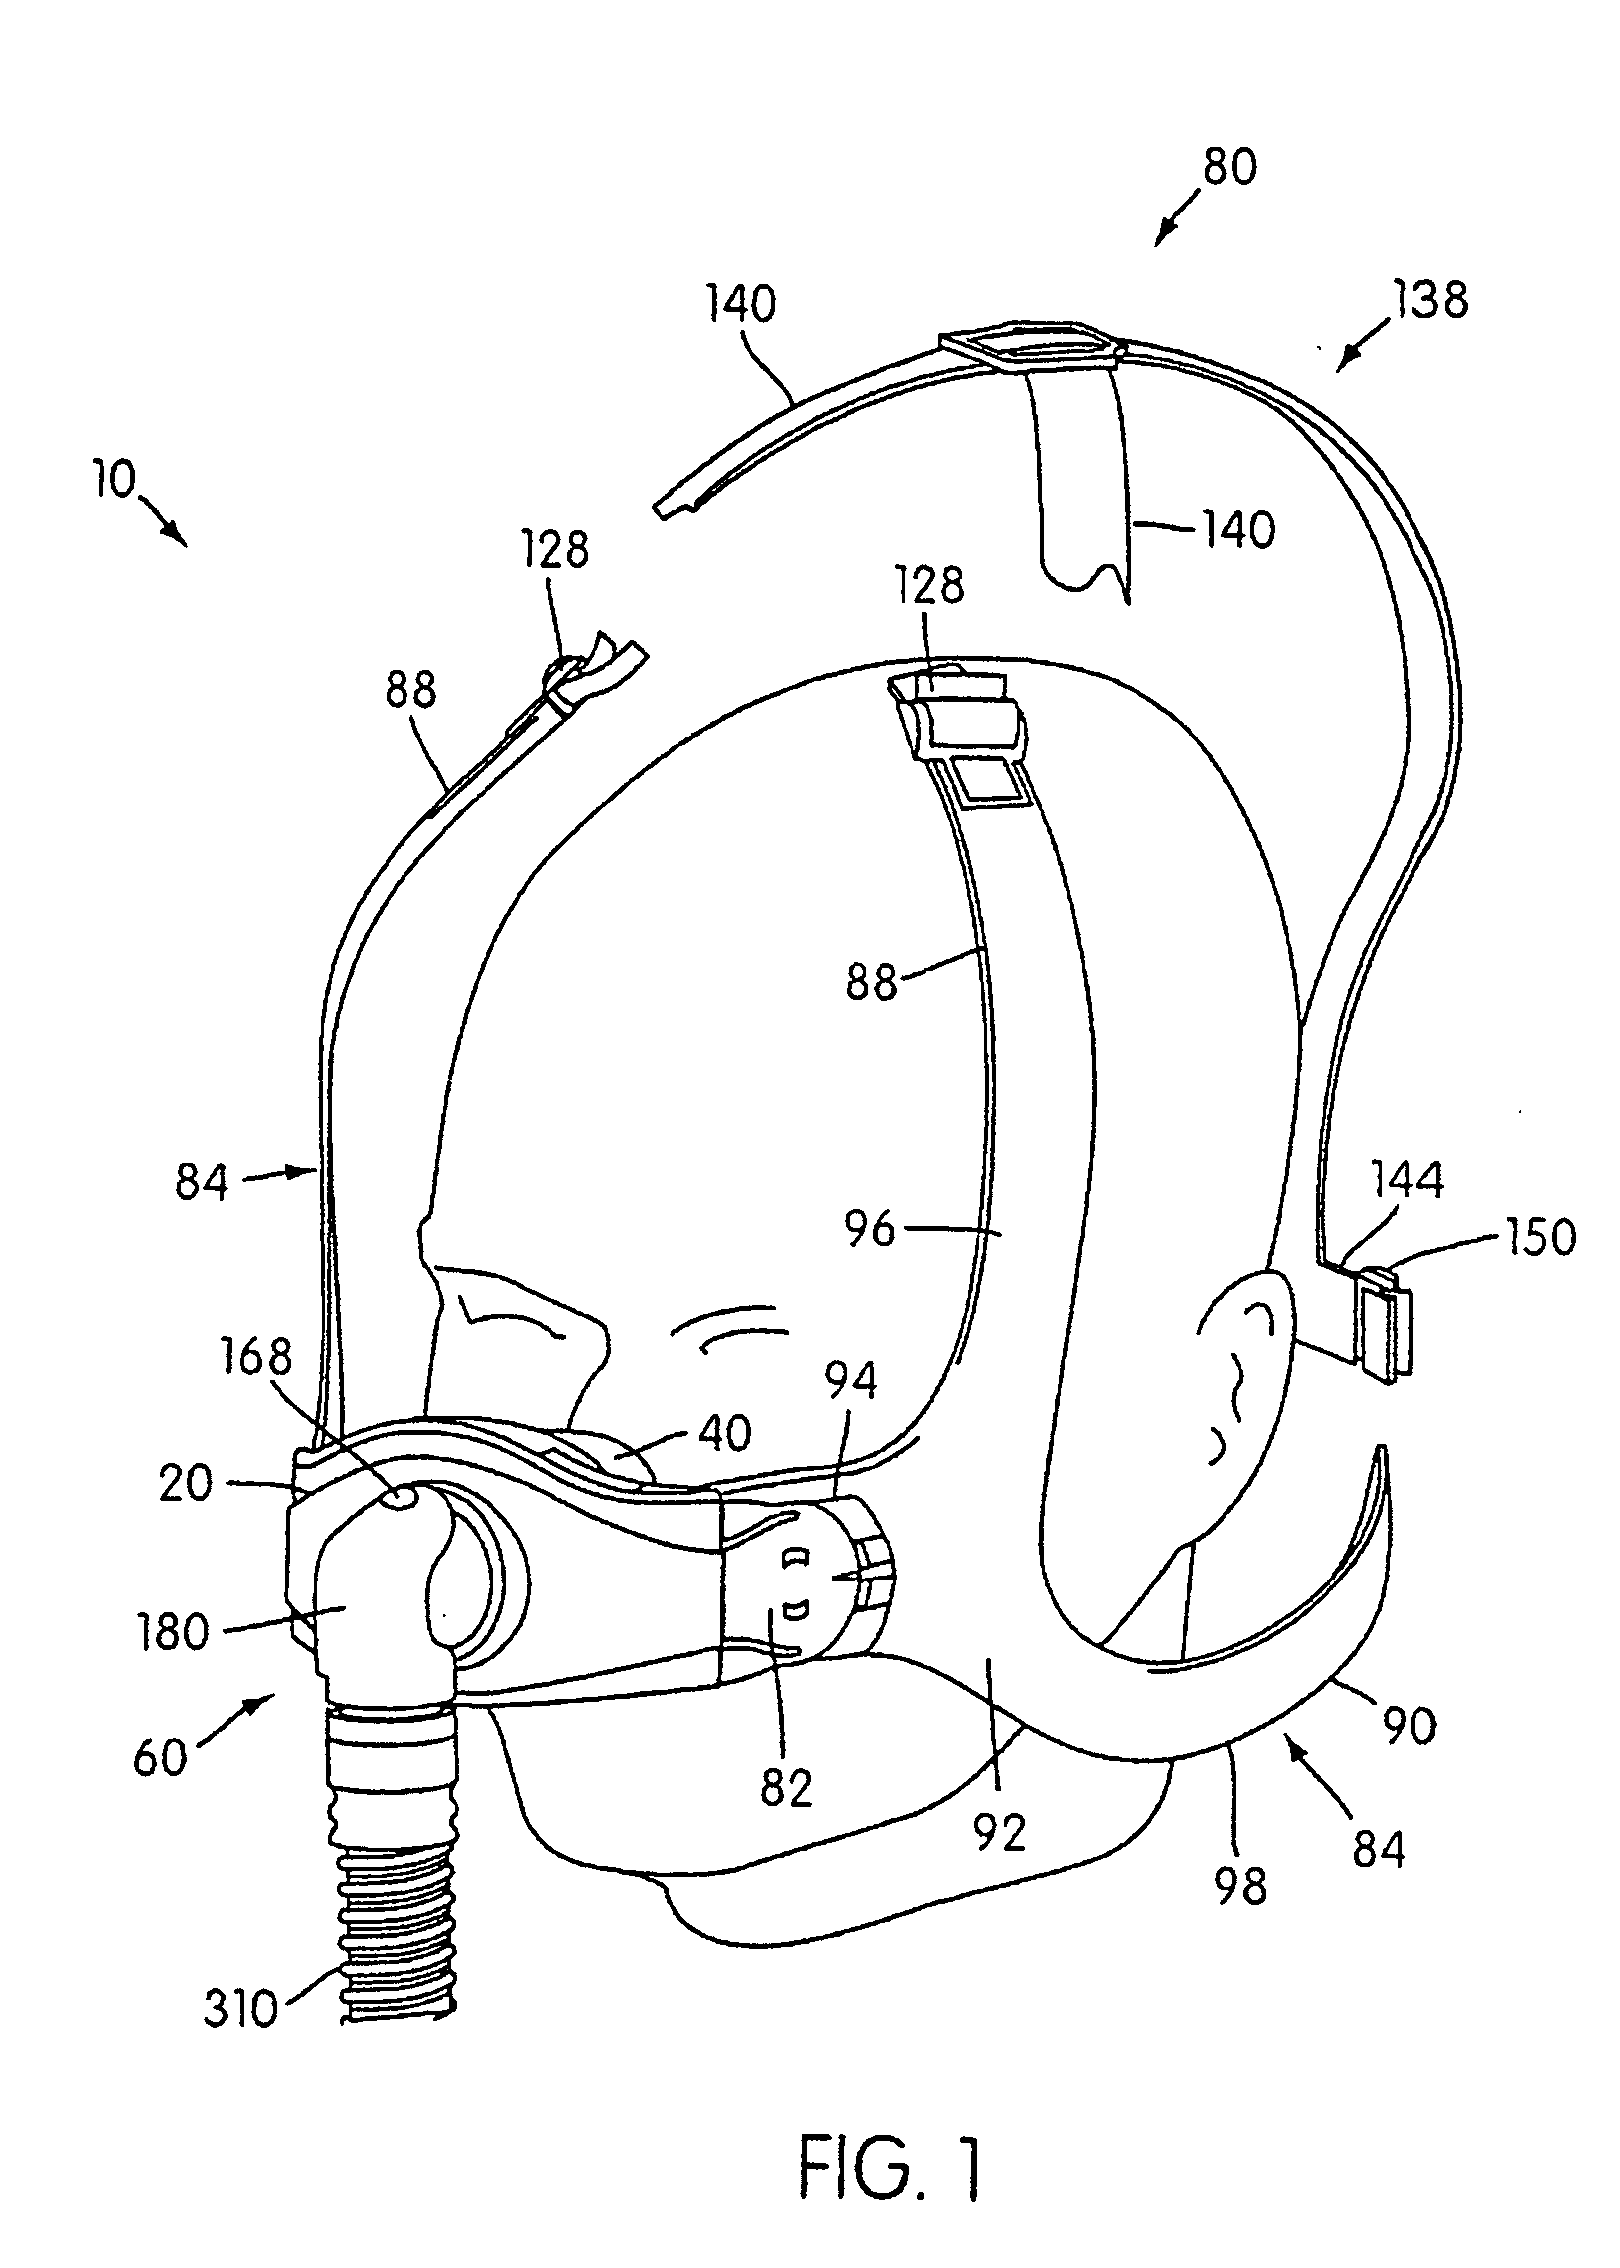 Respiratory mask assembly with magnetic coupling to headgear assembly